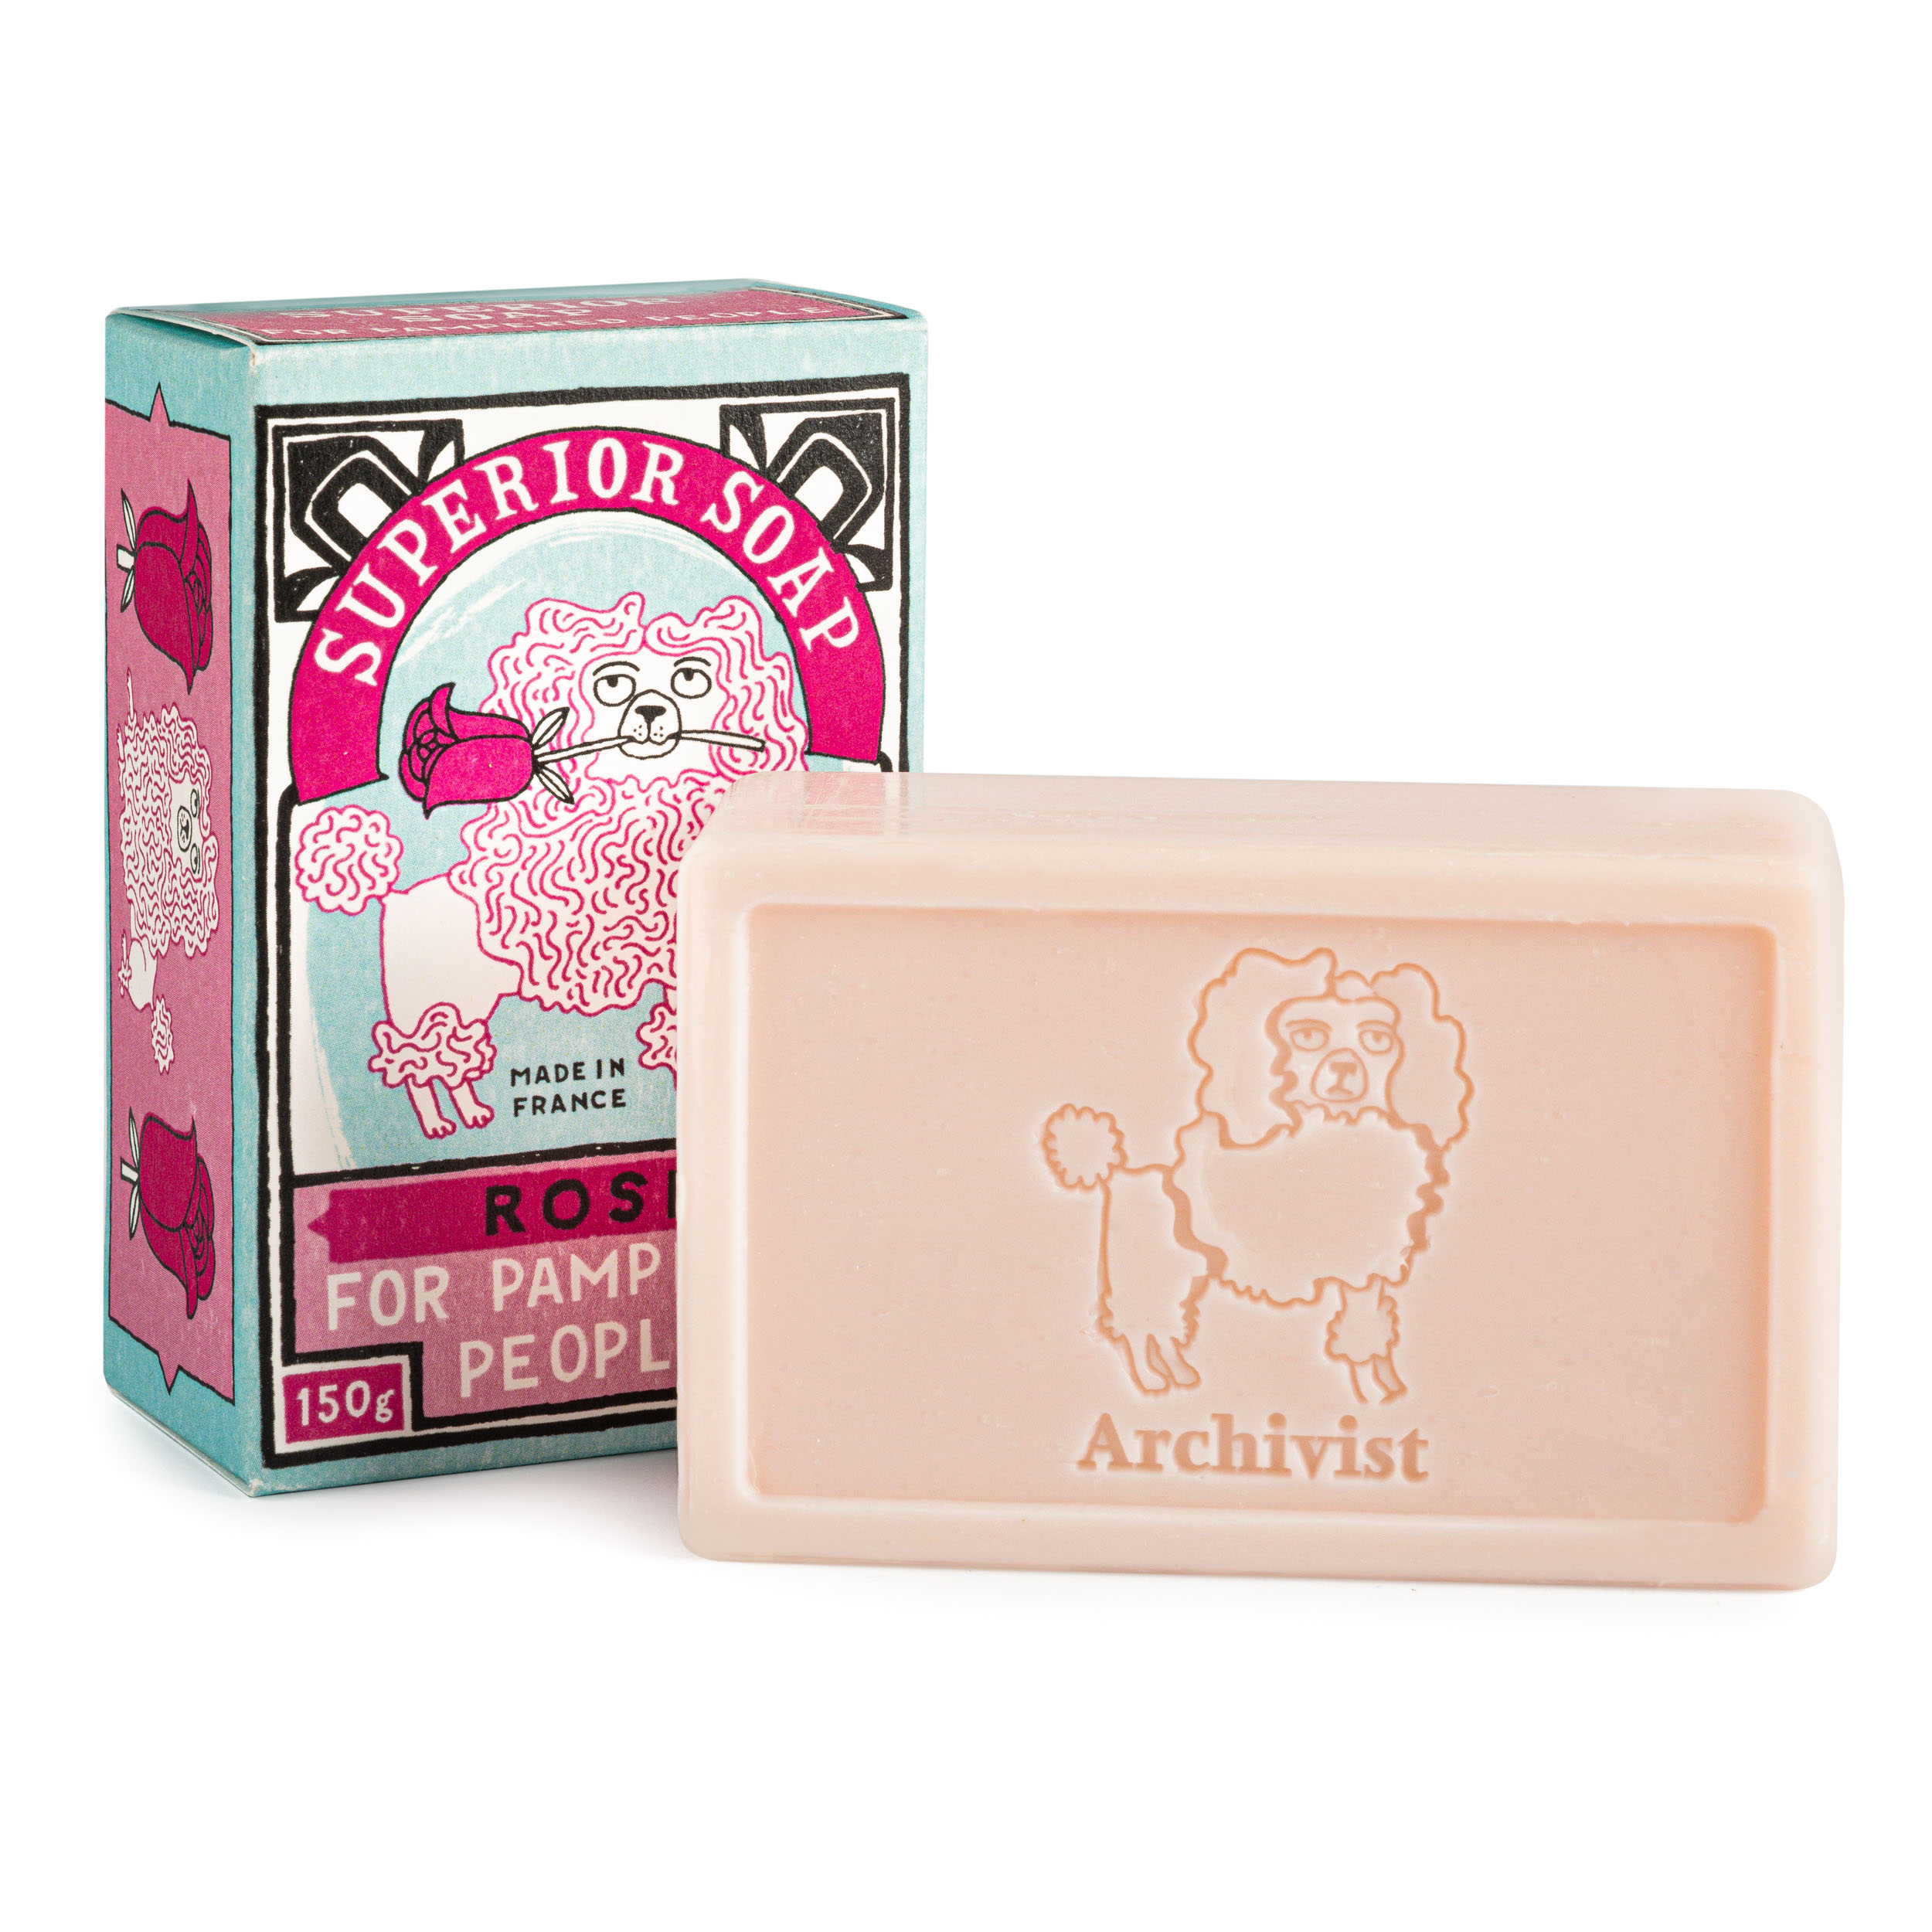 Rose Hand Soap - Soap - Charlotte Farmer - from Archivist Gallery 